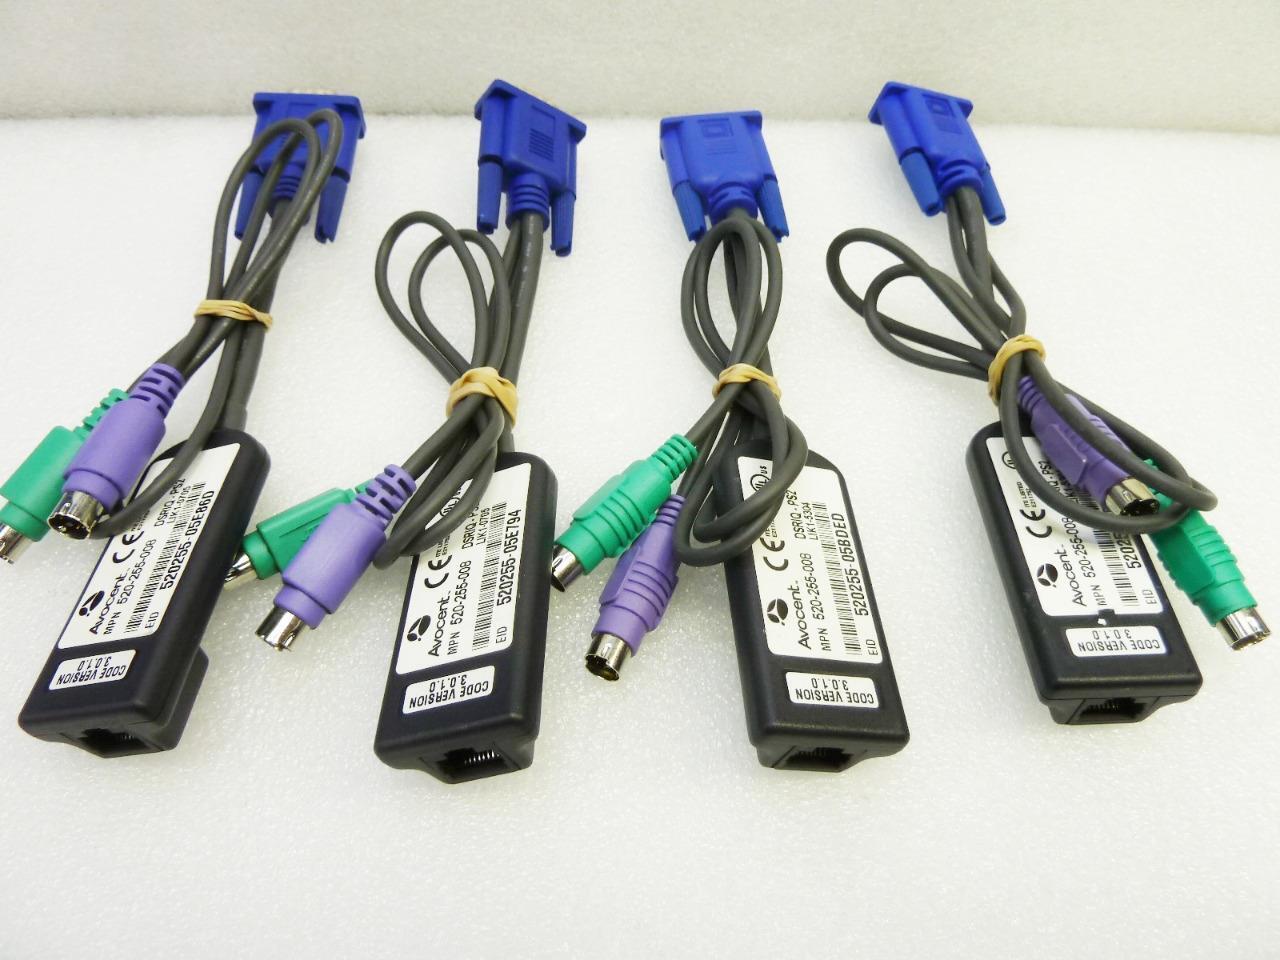 Lot of 4 Avocent Server Interface Module | 520-255-008 | DSRIQ-PS2 | FREE S/H